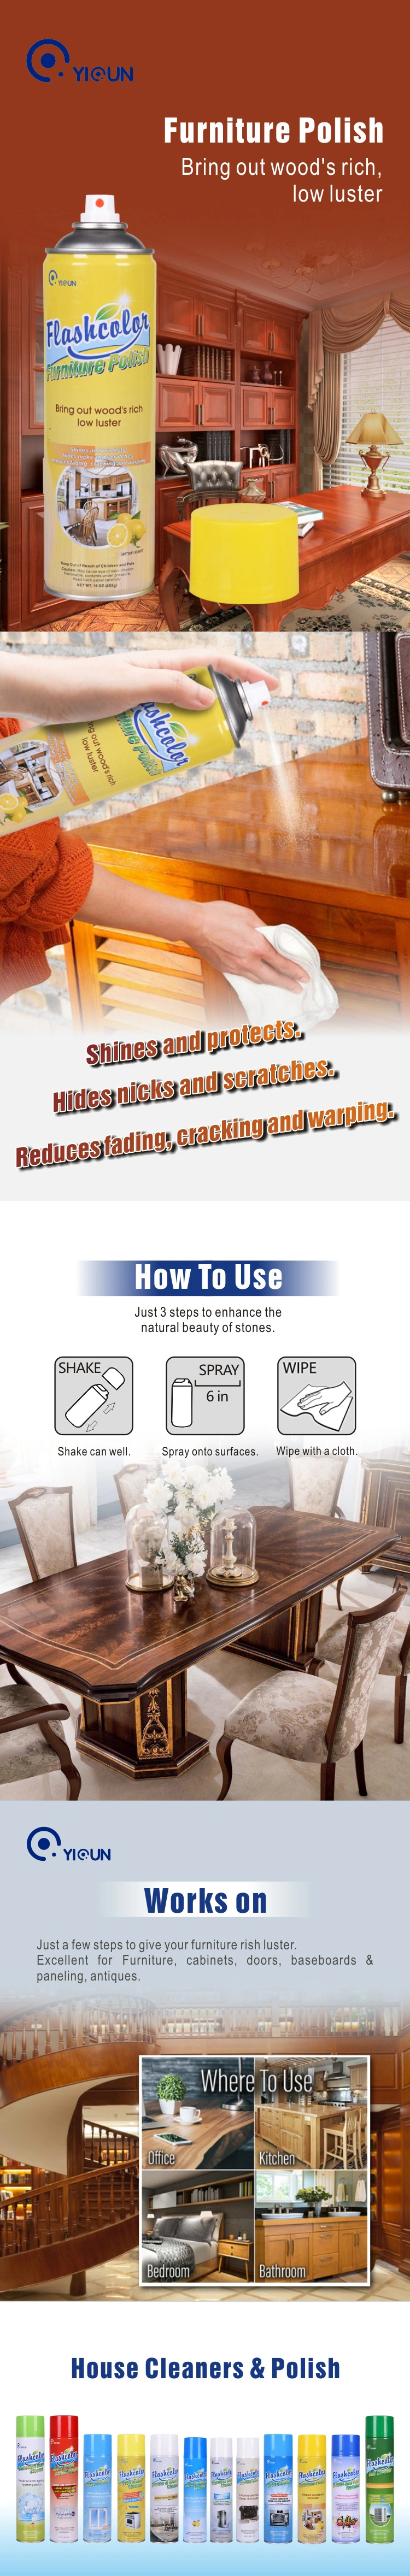 Wood Leather Care Cleaning Polishing and Waxing Furniture Spray